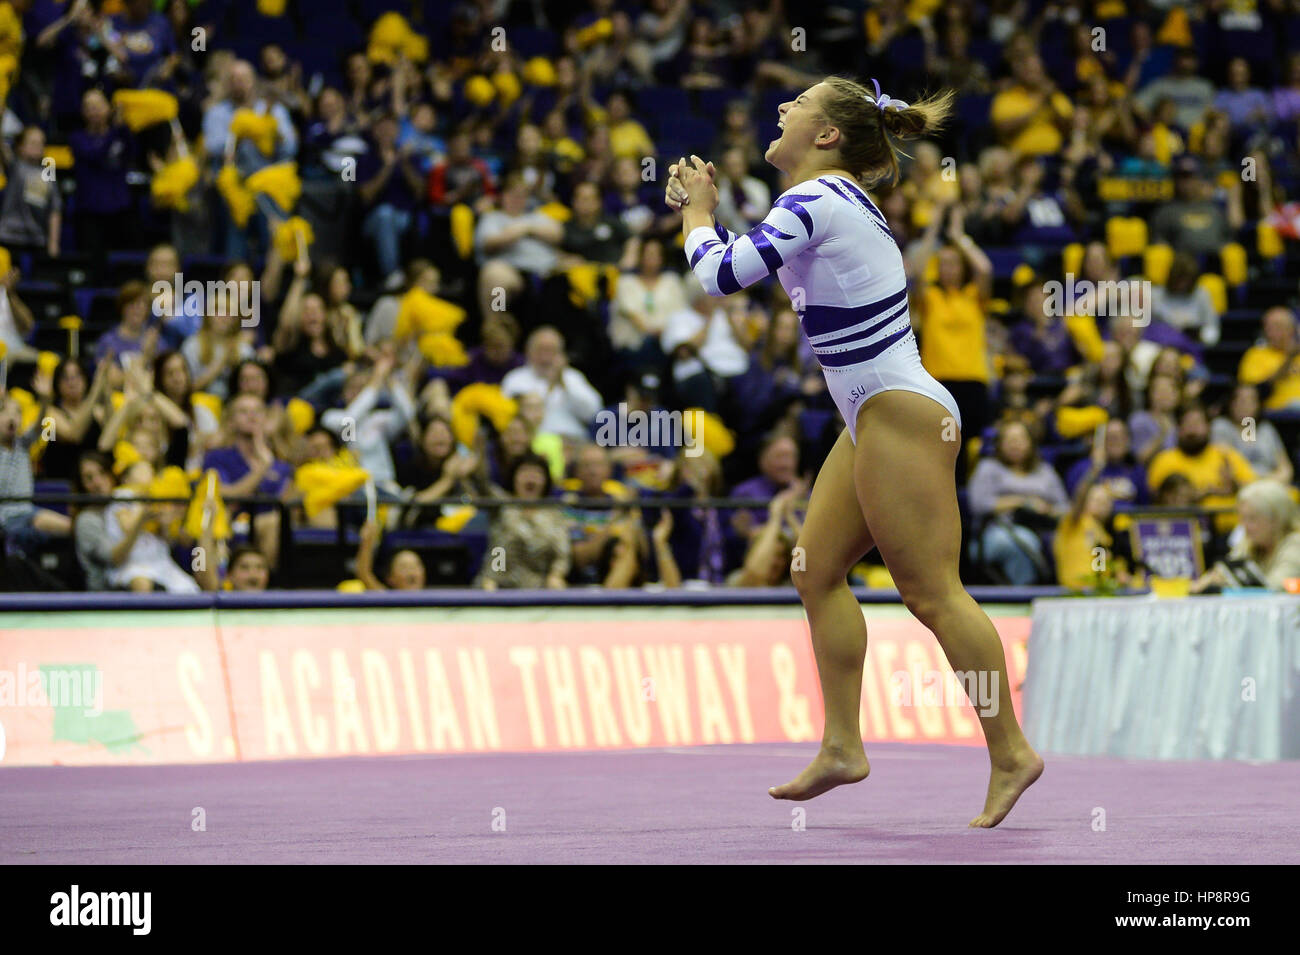 Baton Rouge, Louisiana, USA. 19th Feb, 2017. Mary Lou Retton's daughter MCKENNA KELLEY celebrates after completing her floor exercise routine at the Pete Maravich Assembly Center, Baton Rouge, Louisiana. Credit: Amy Sanderson/ZUMA Wire/Alamy Live News Stock Photo